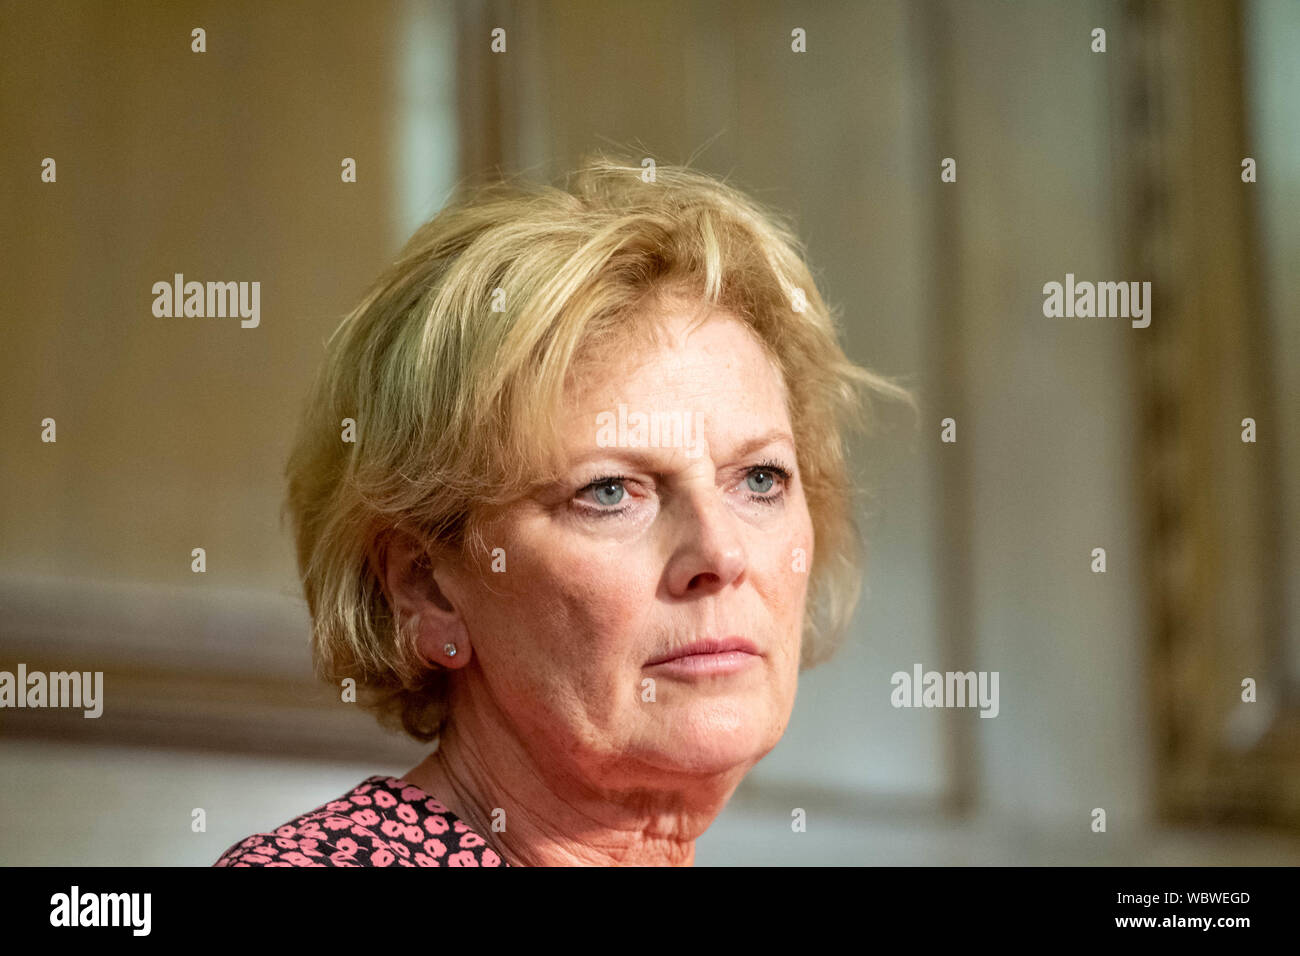 London, UK. 27 August 2019.  Church House declaration meeting of UK opposition leaders and MP's signing a declaration against the shutting down of parliament by Boris Johnson MP PC Prime Minister. Anna Soubry MP leader of Change UK, who arrived late due to illness Credit Ian DavidsonAlamy Live News Stock Photo